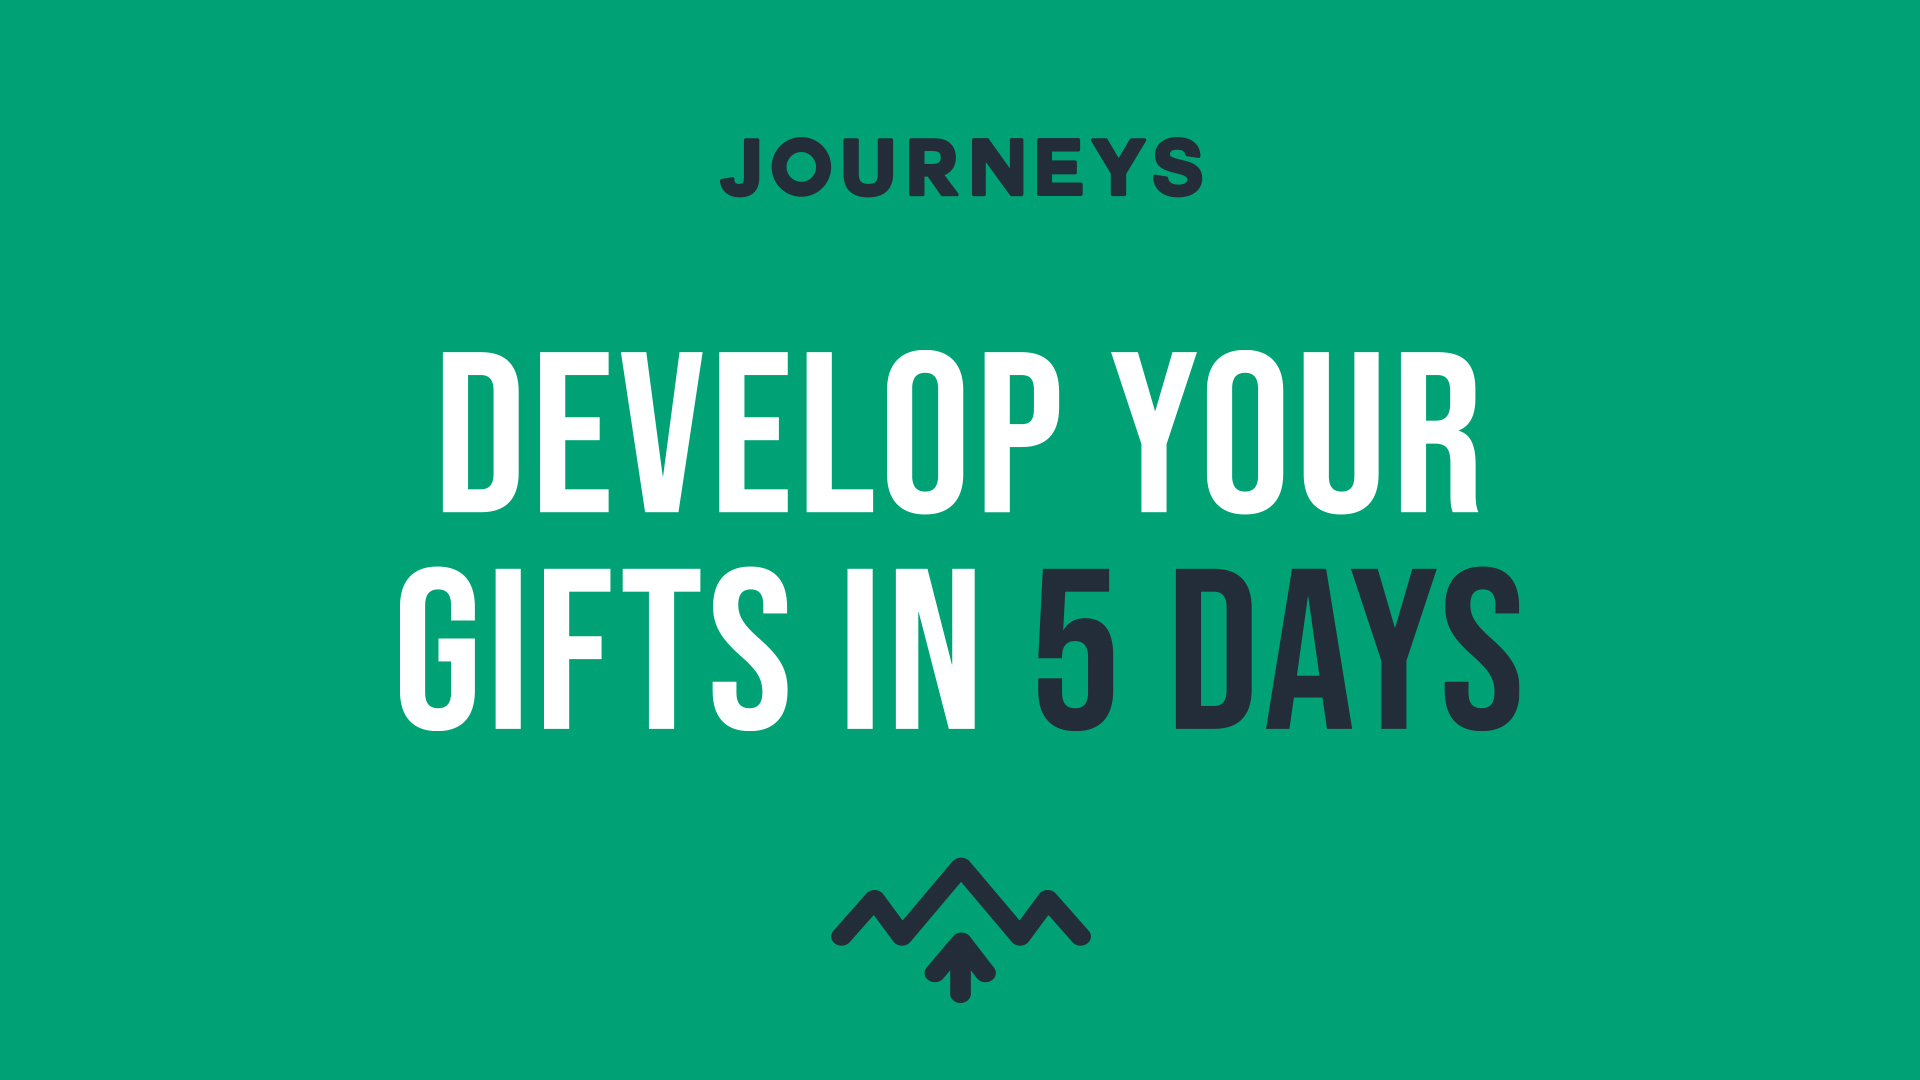 Develop Your Gifts in 5 Days